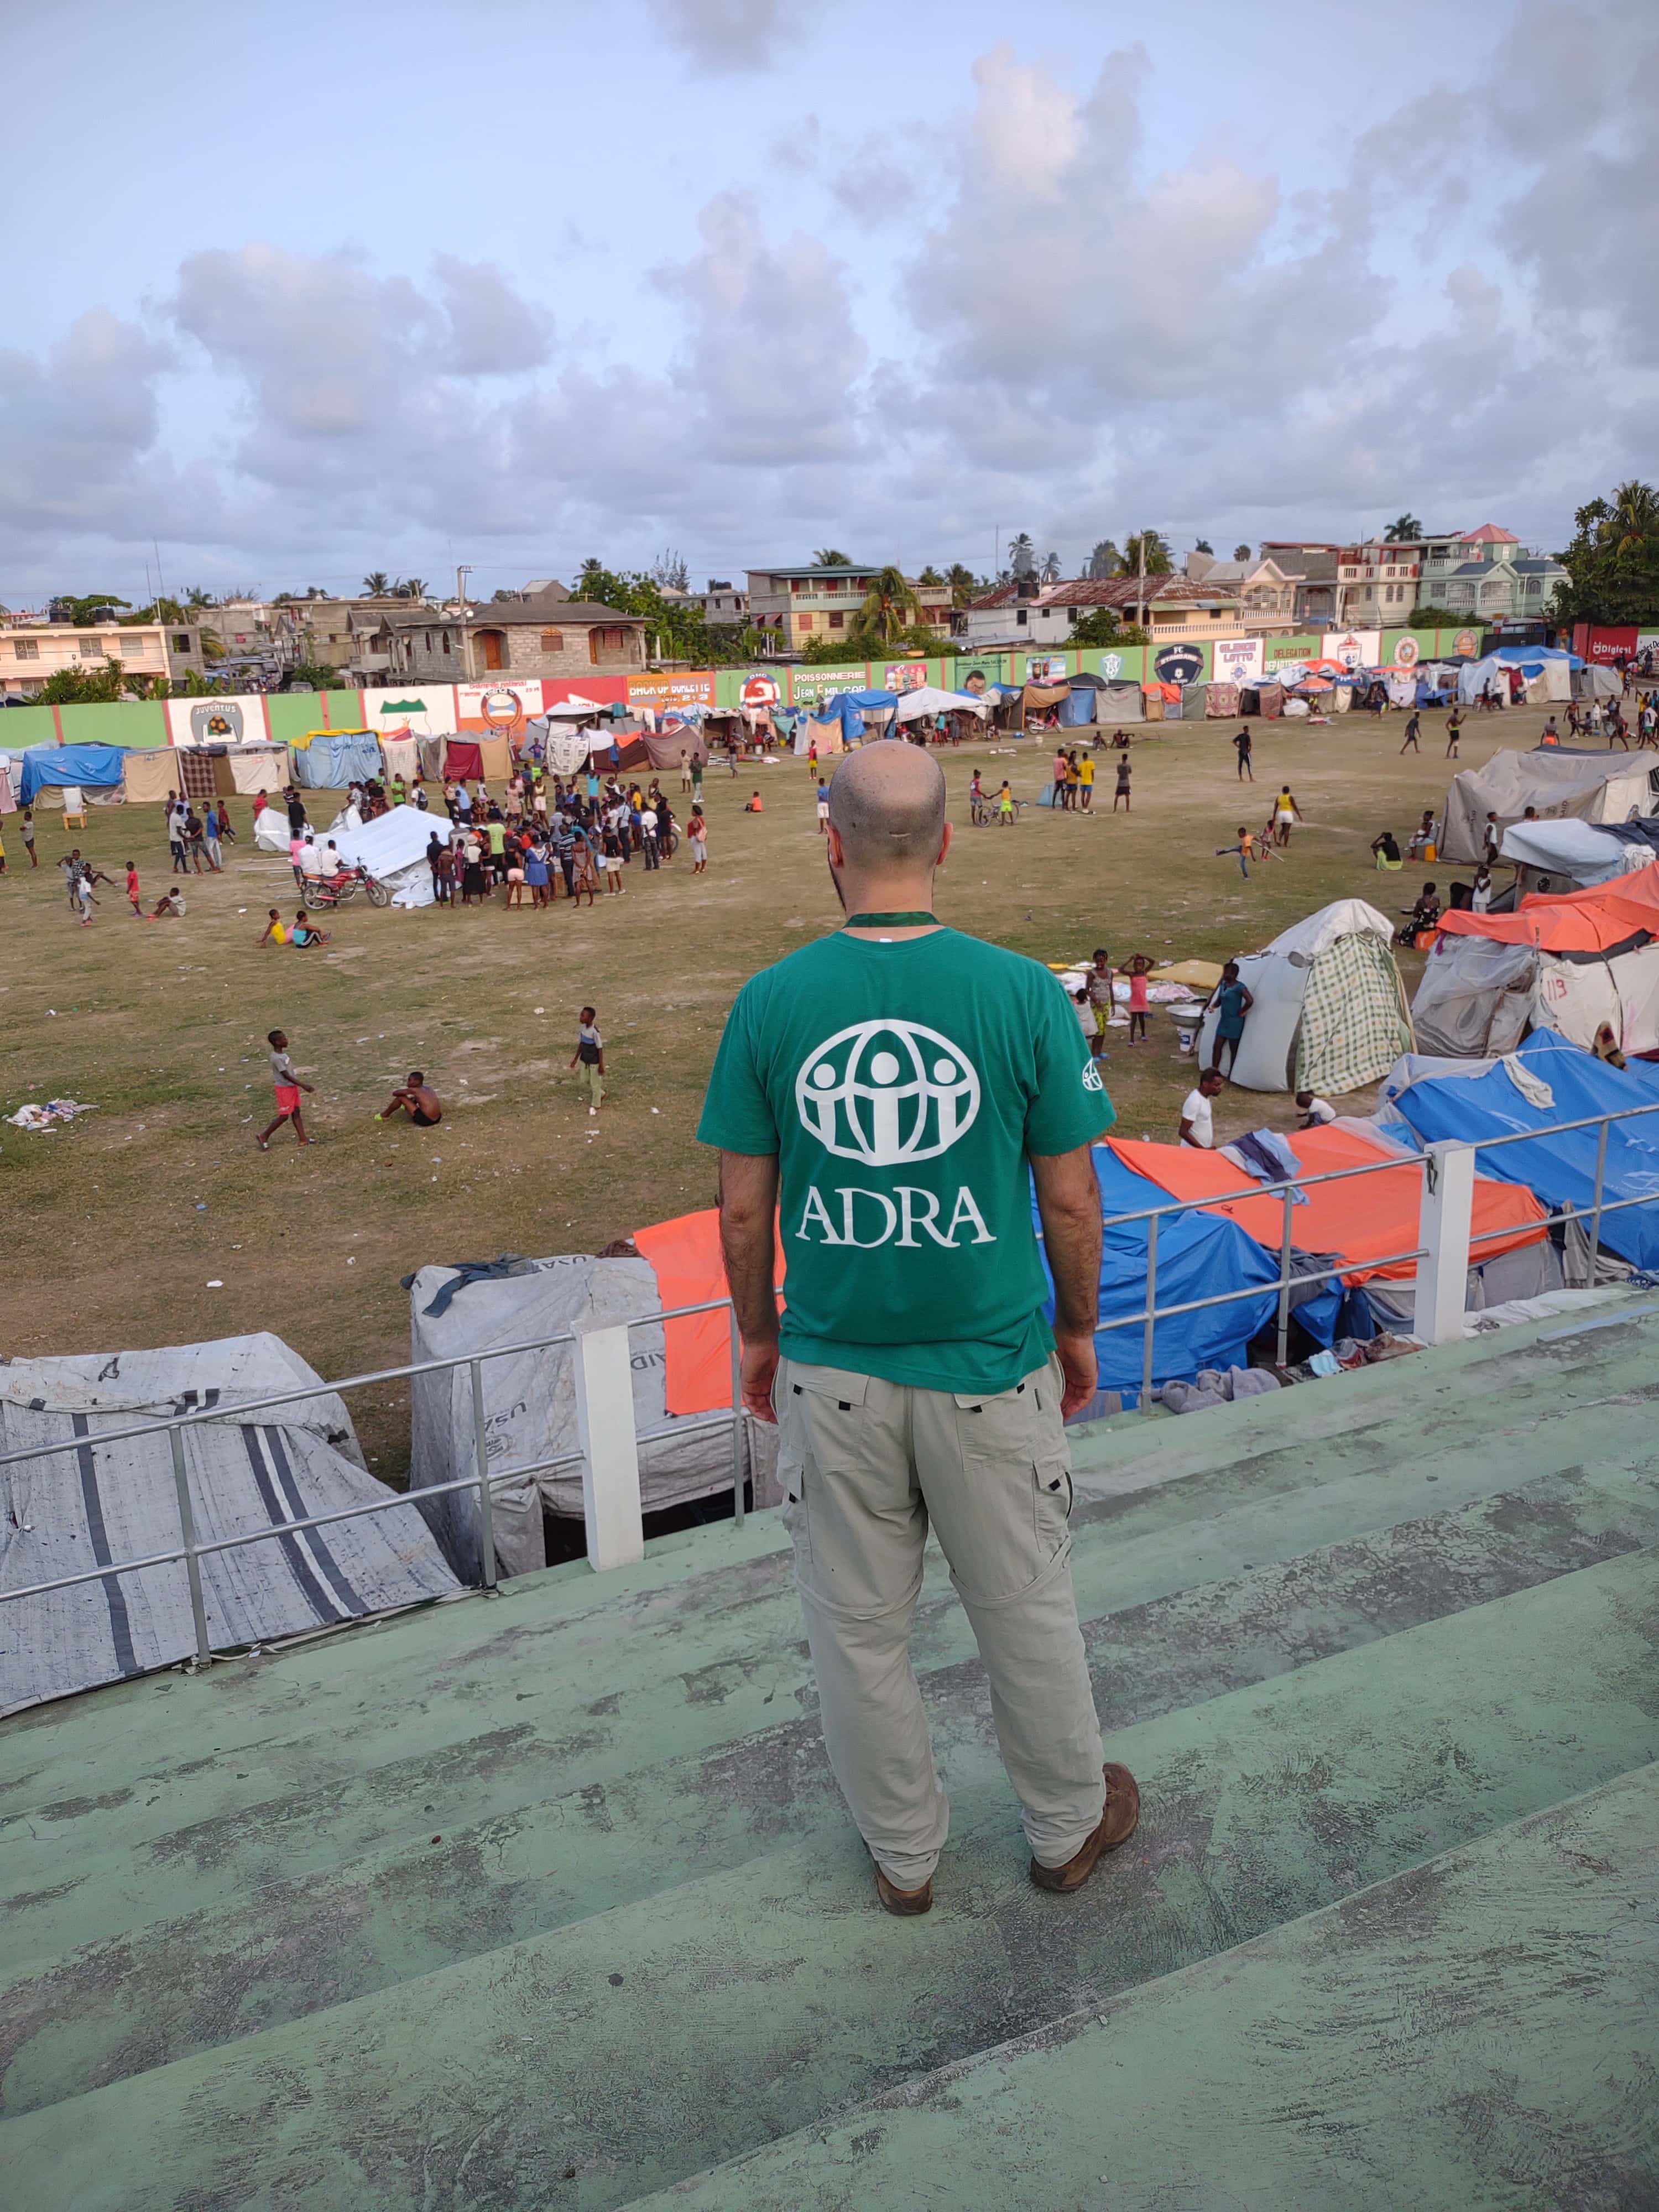 An Haiti ADRA worker looks at one of the camps for the displaced in Haiti after the August 14, 2021 earthquake. [Photo: Lisa Schnurr]